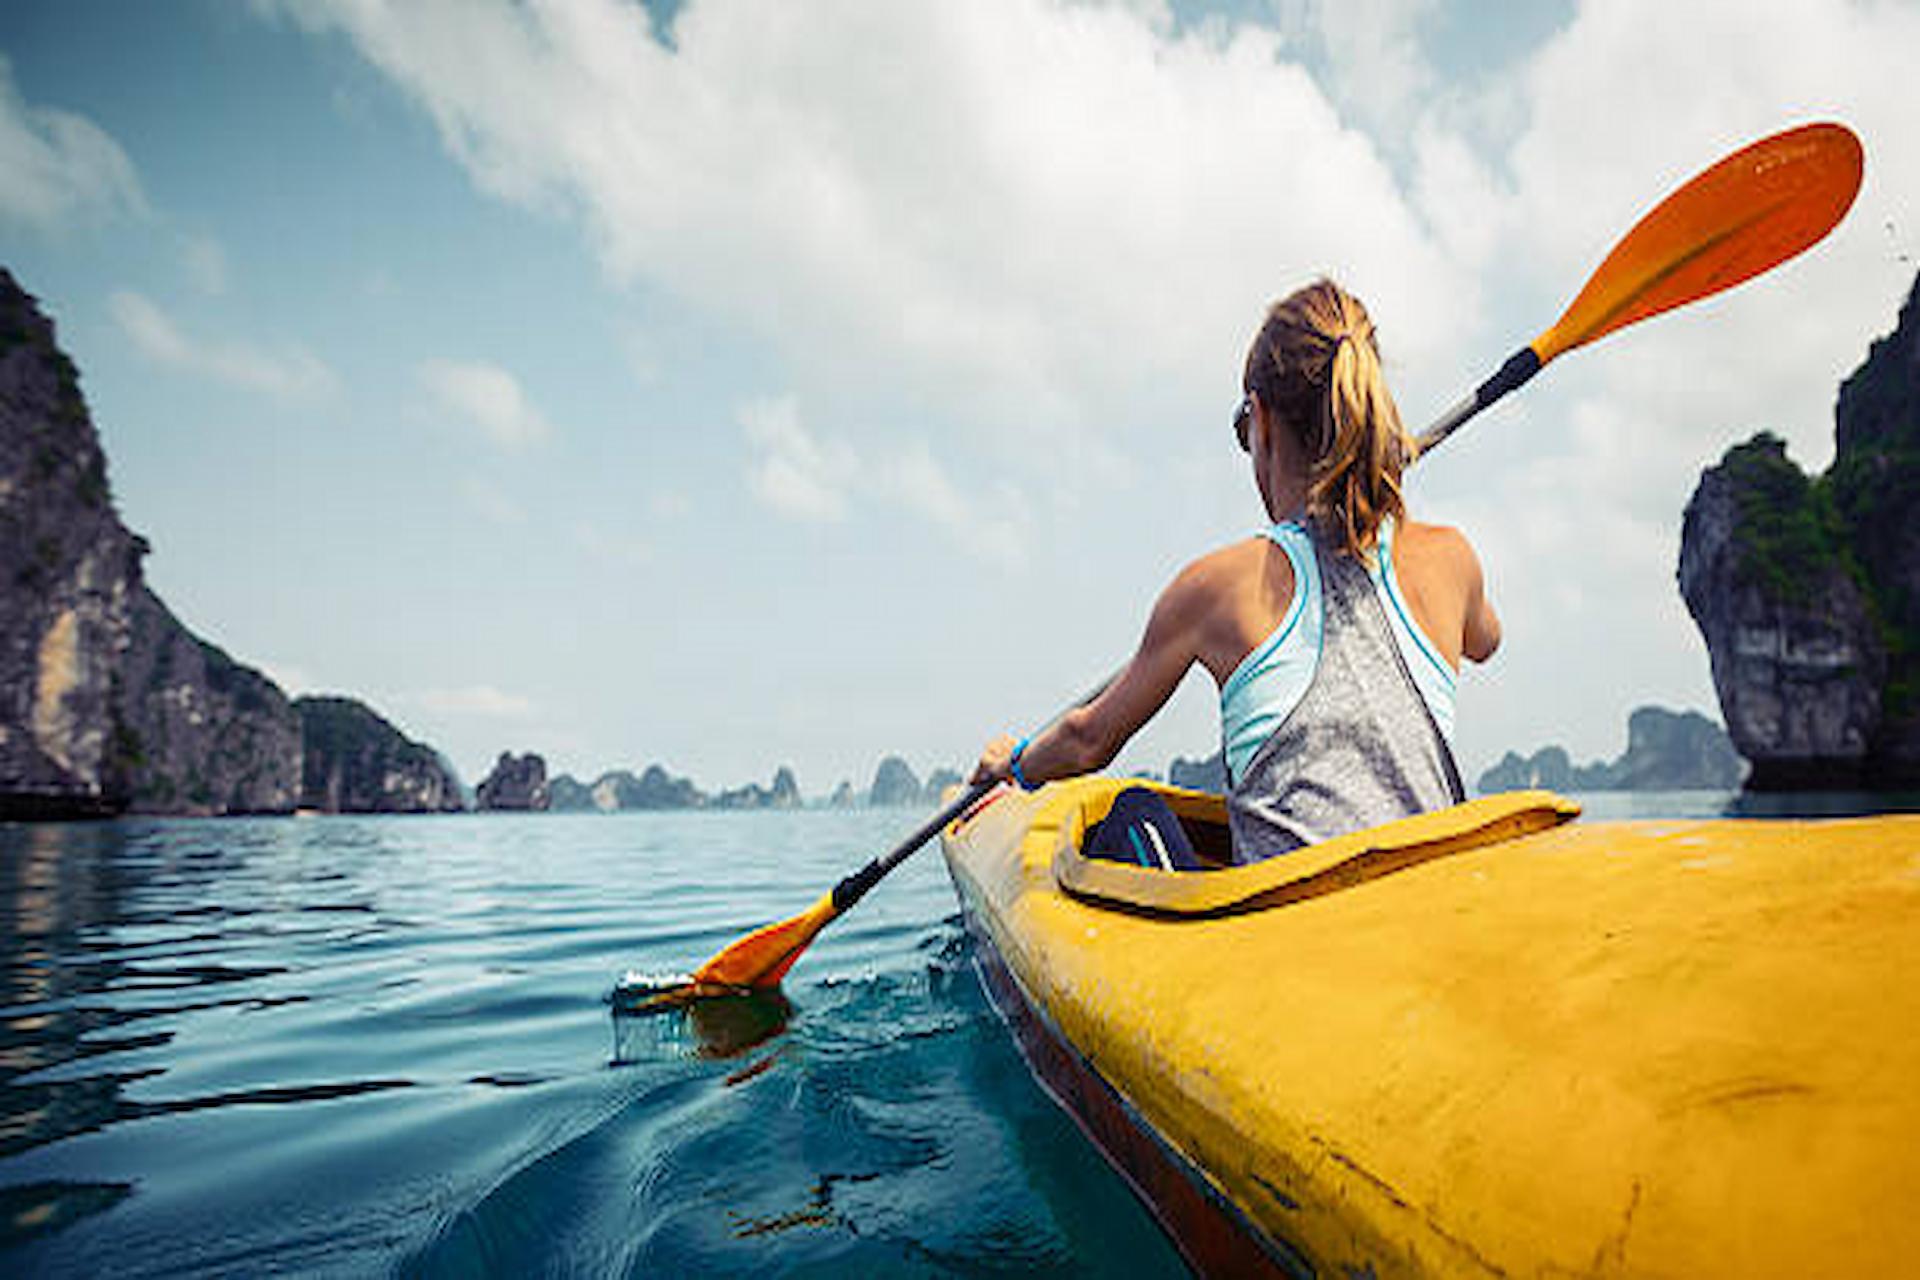 What Are The Prominent Types Of Kayaks?